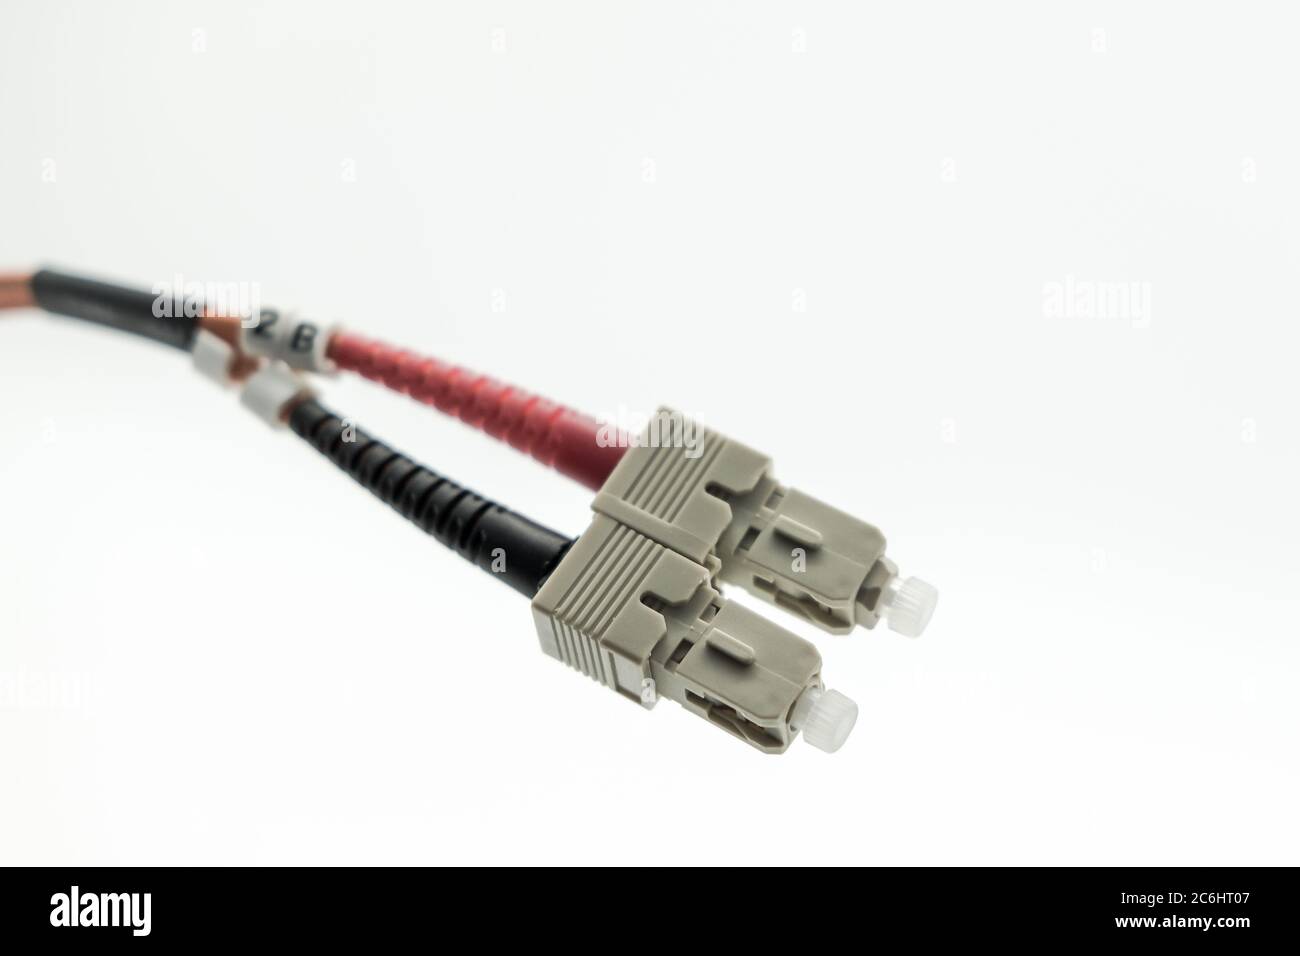 Macro image of super-fast Internet fibre optic patch leads used for high-speed, optical networking connections. Shown as a duplex pair of connectors. Stock Photo